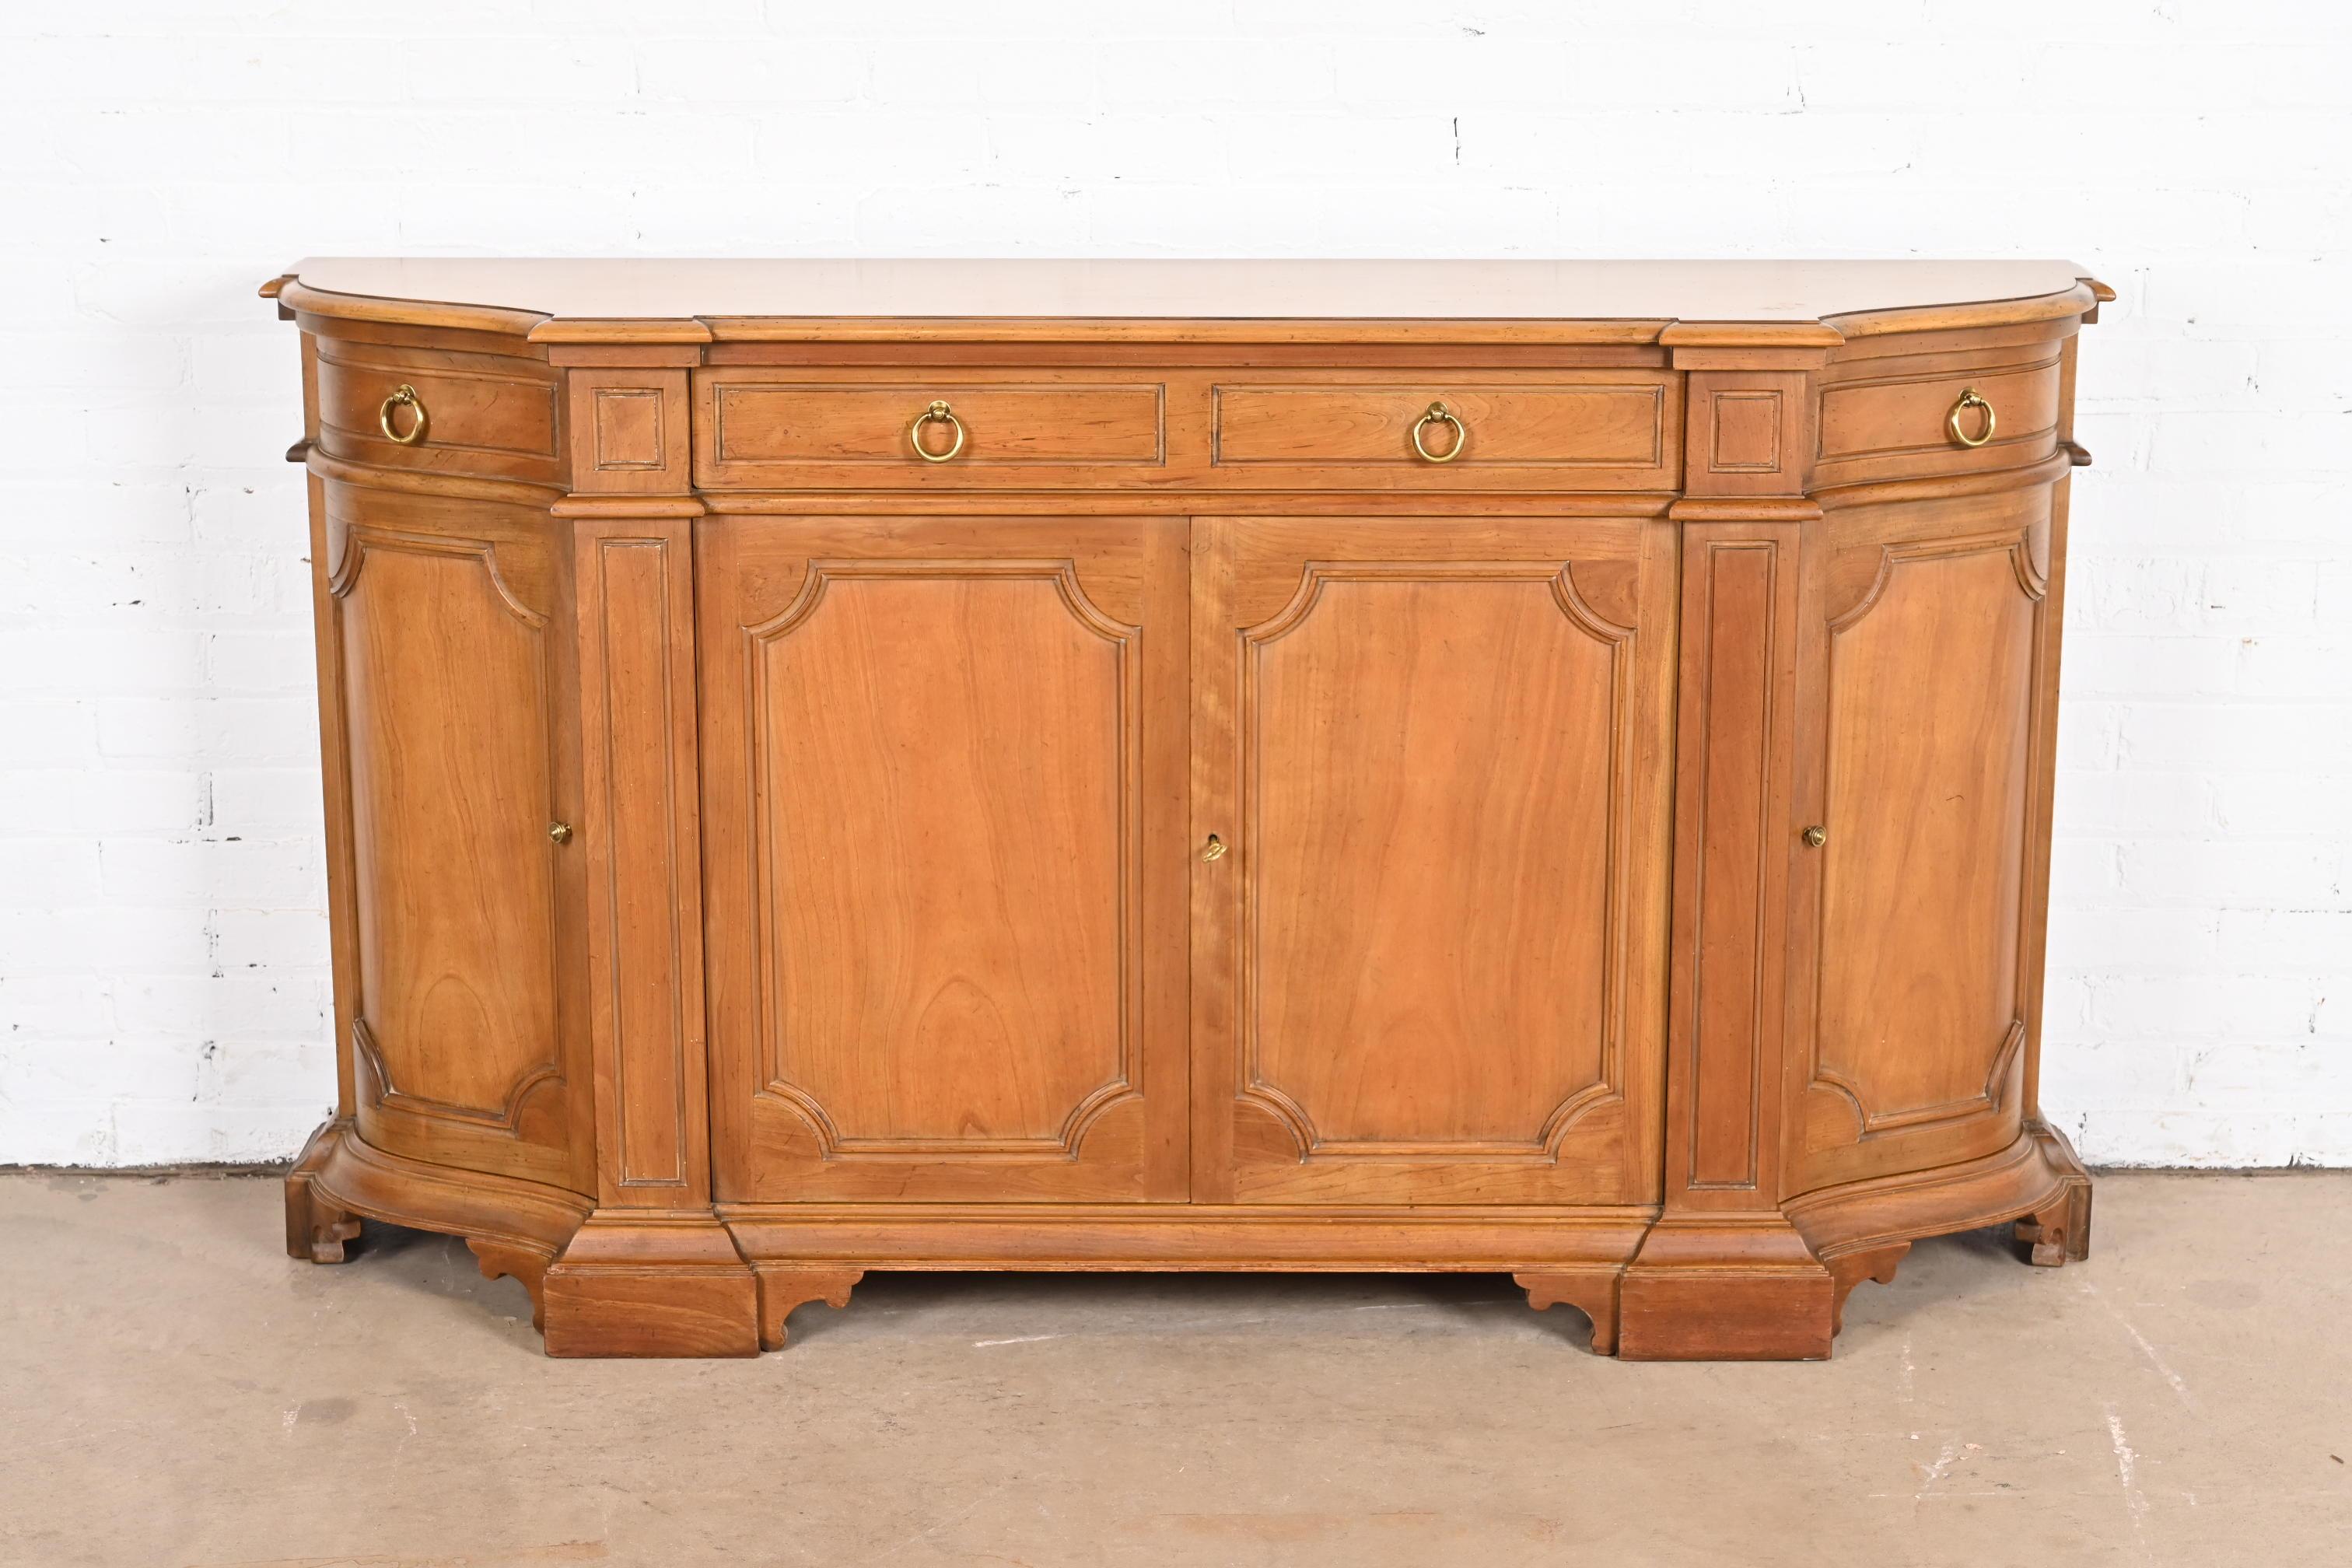 A gorgeous French Regency style sideboard, credenza, or bar cabinet

By Baker Furniture

USA, Circa 1960s

Carved cherry wood, with original brass hardware. Cabinet locks, and key is included.

Measures: 64